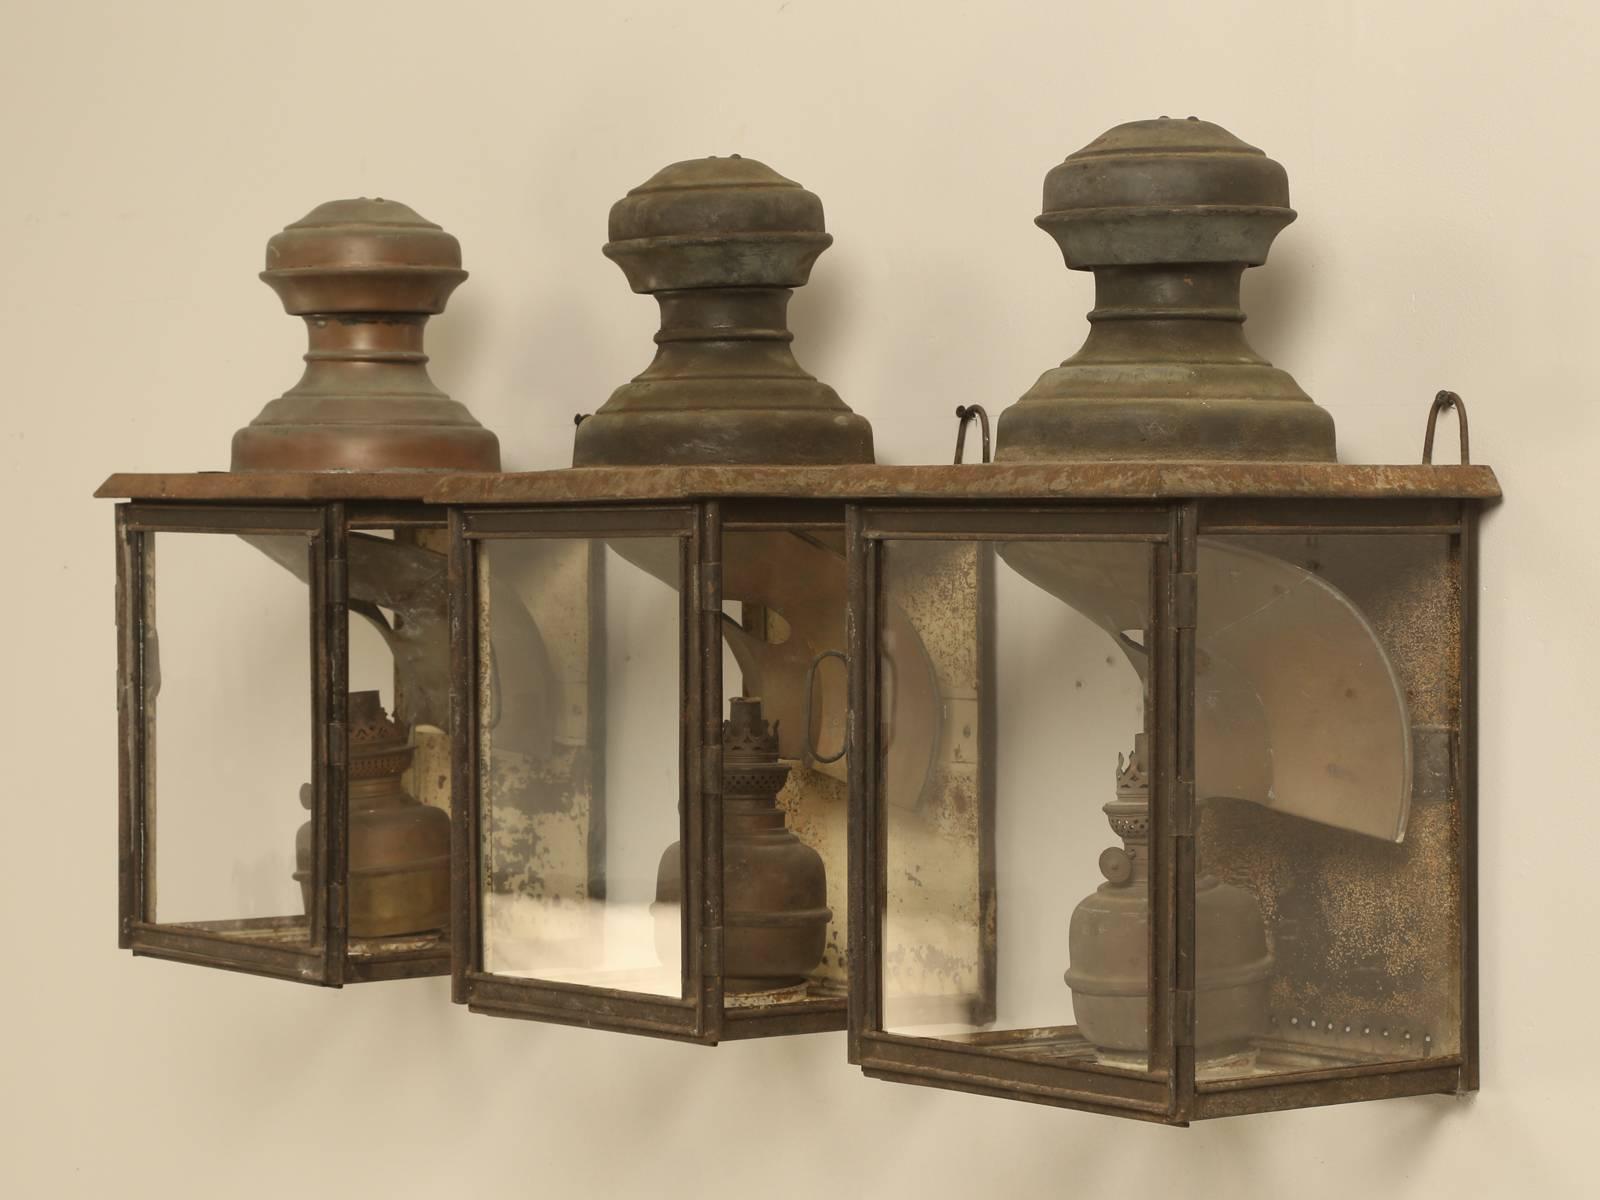 Wonderful set of three Antique French Lanterns from the 1800s with their old handmade French wavy glass and the kerosene canisters still in place. The patina is exactly how they were found and other than cleaning the glass, the lanterns are